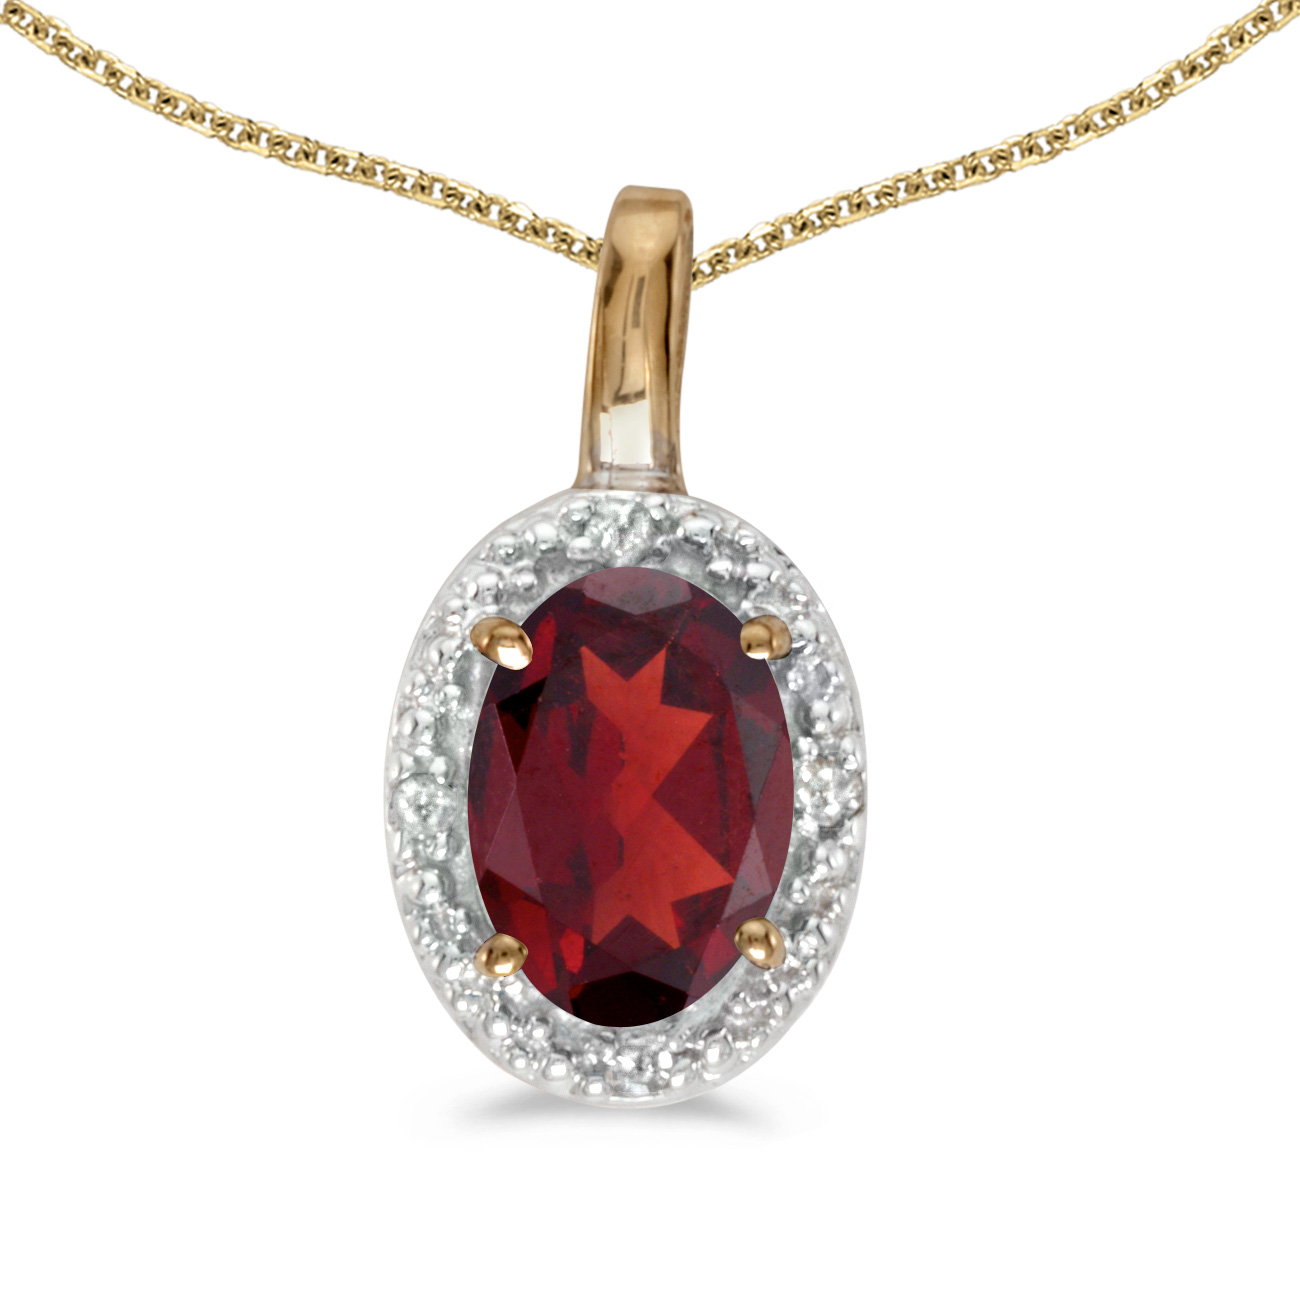 DIRECT-JEWELRY DON'T FORGET THE DASH 14k Yellow Gold Oval Garnet And Diamond Pendant with 18" Chain